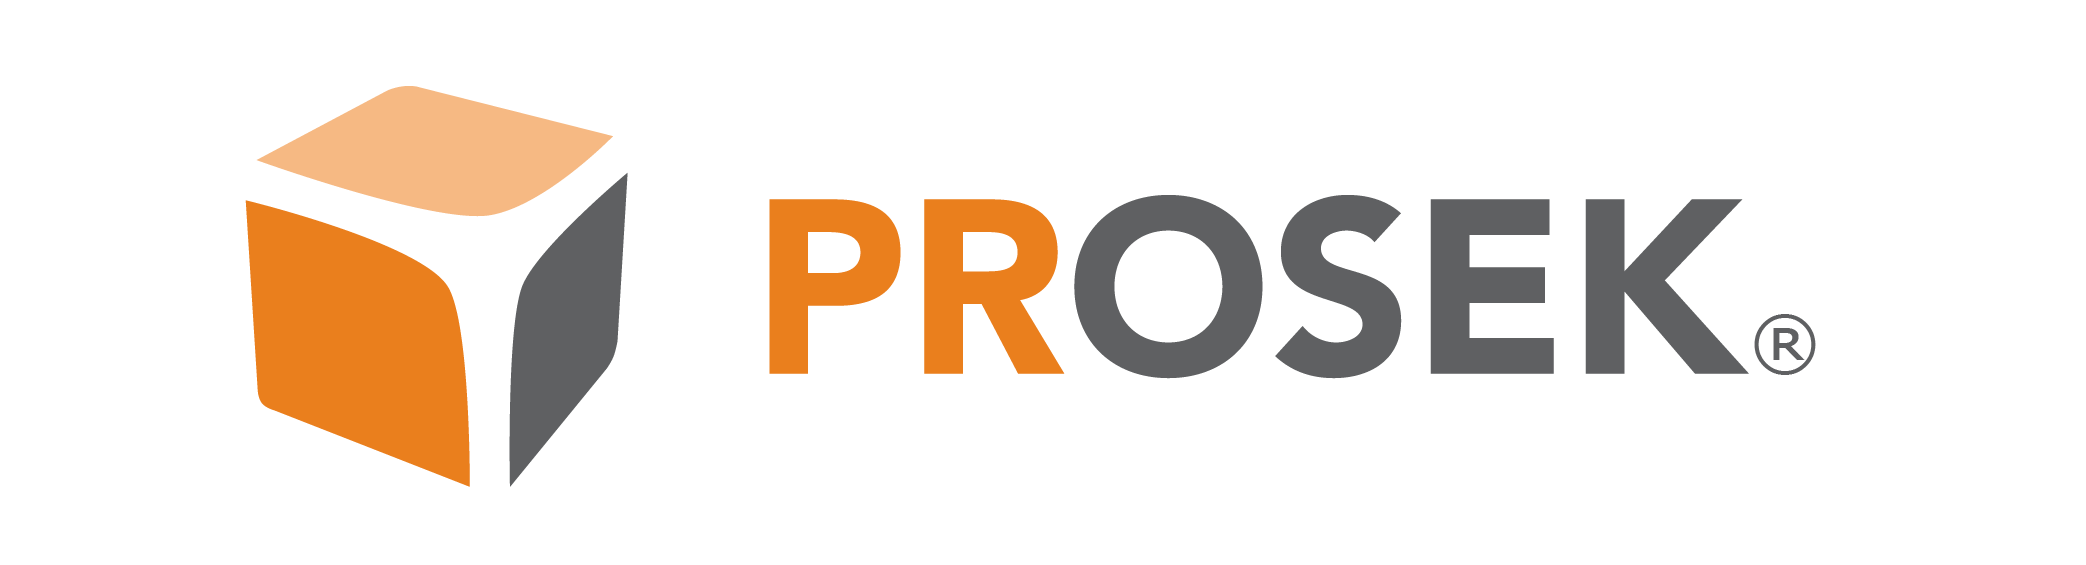 prosek_logo with air.png